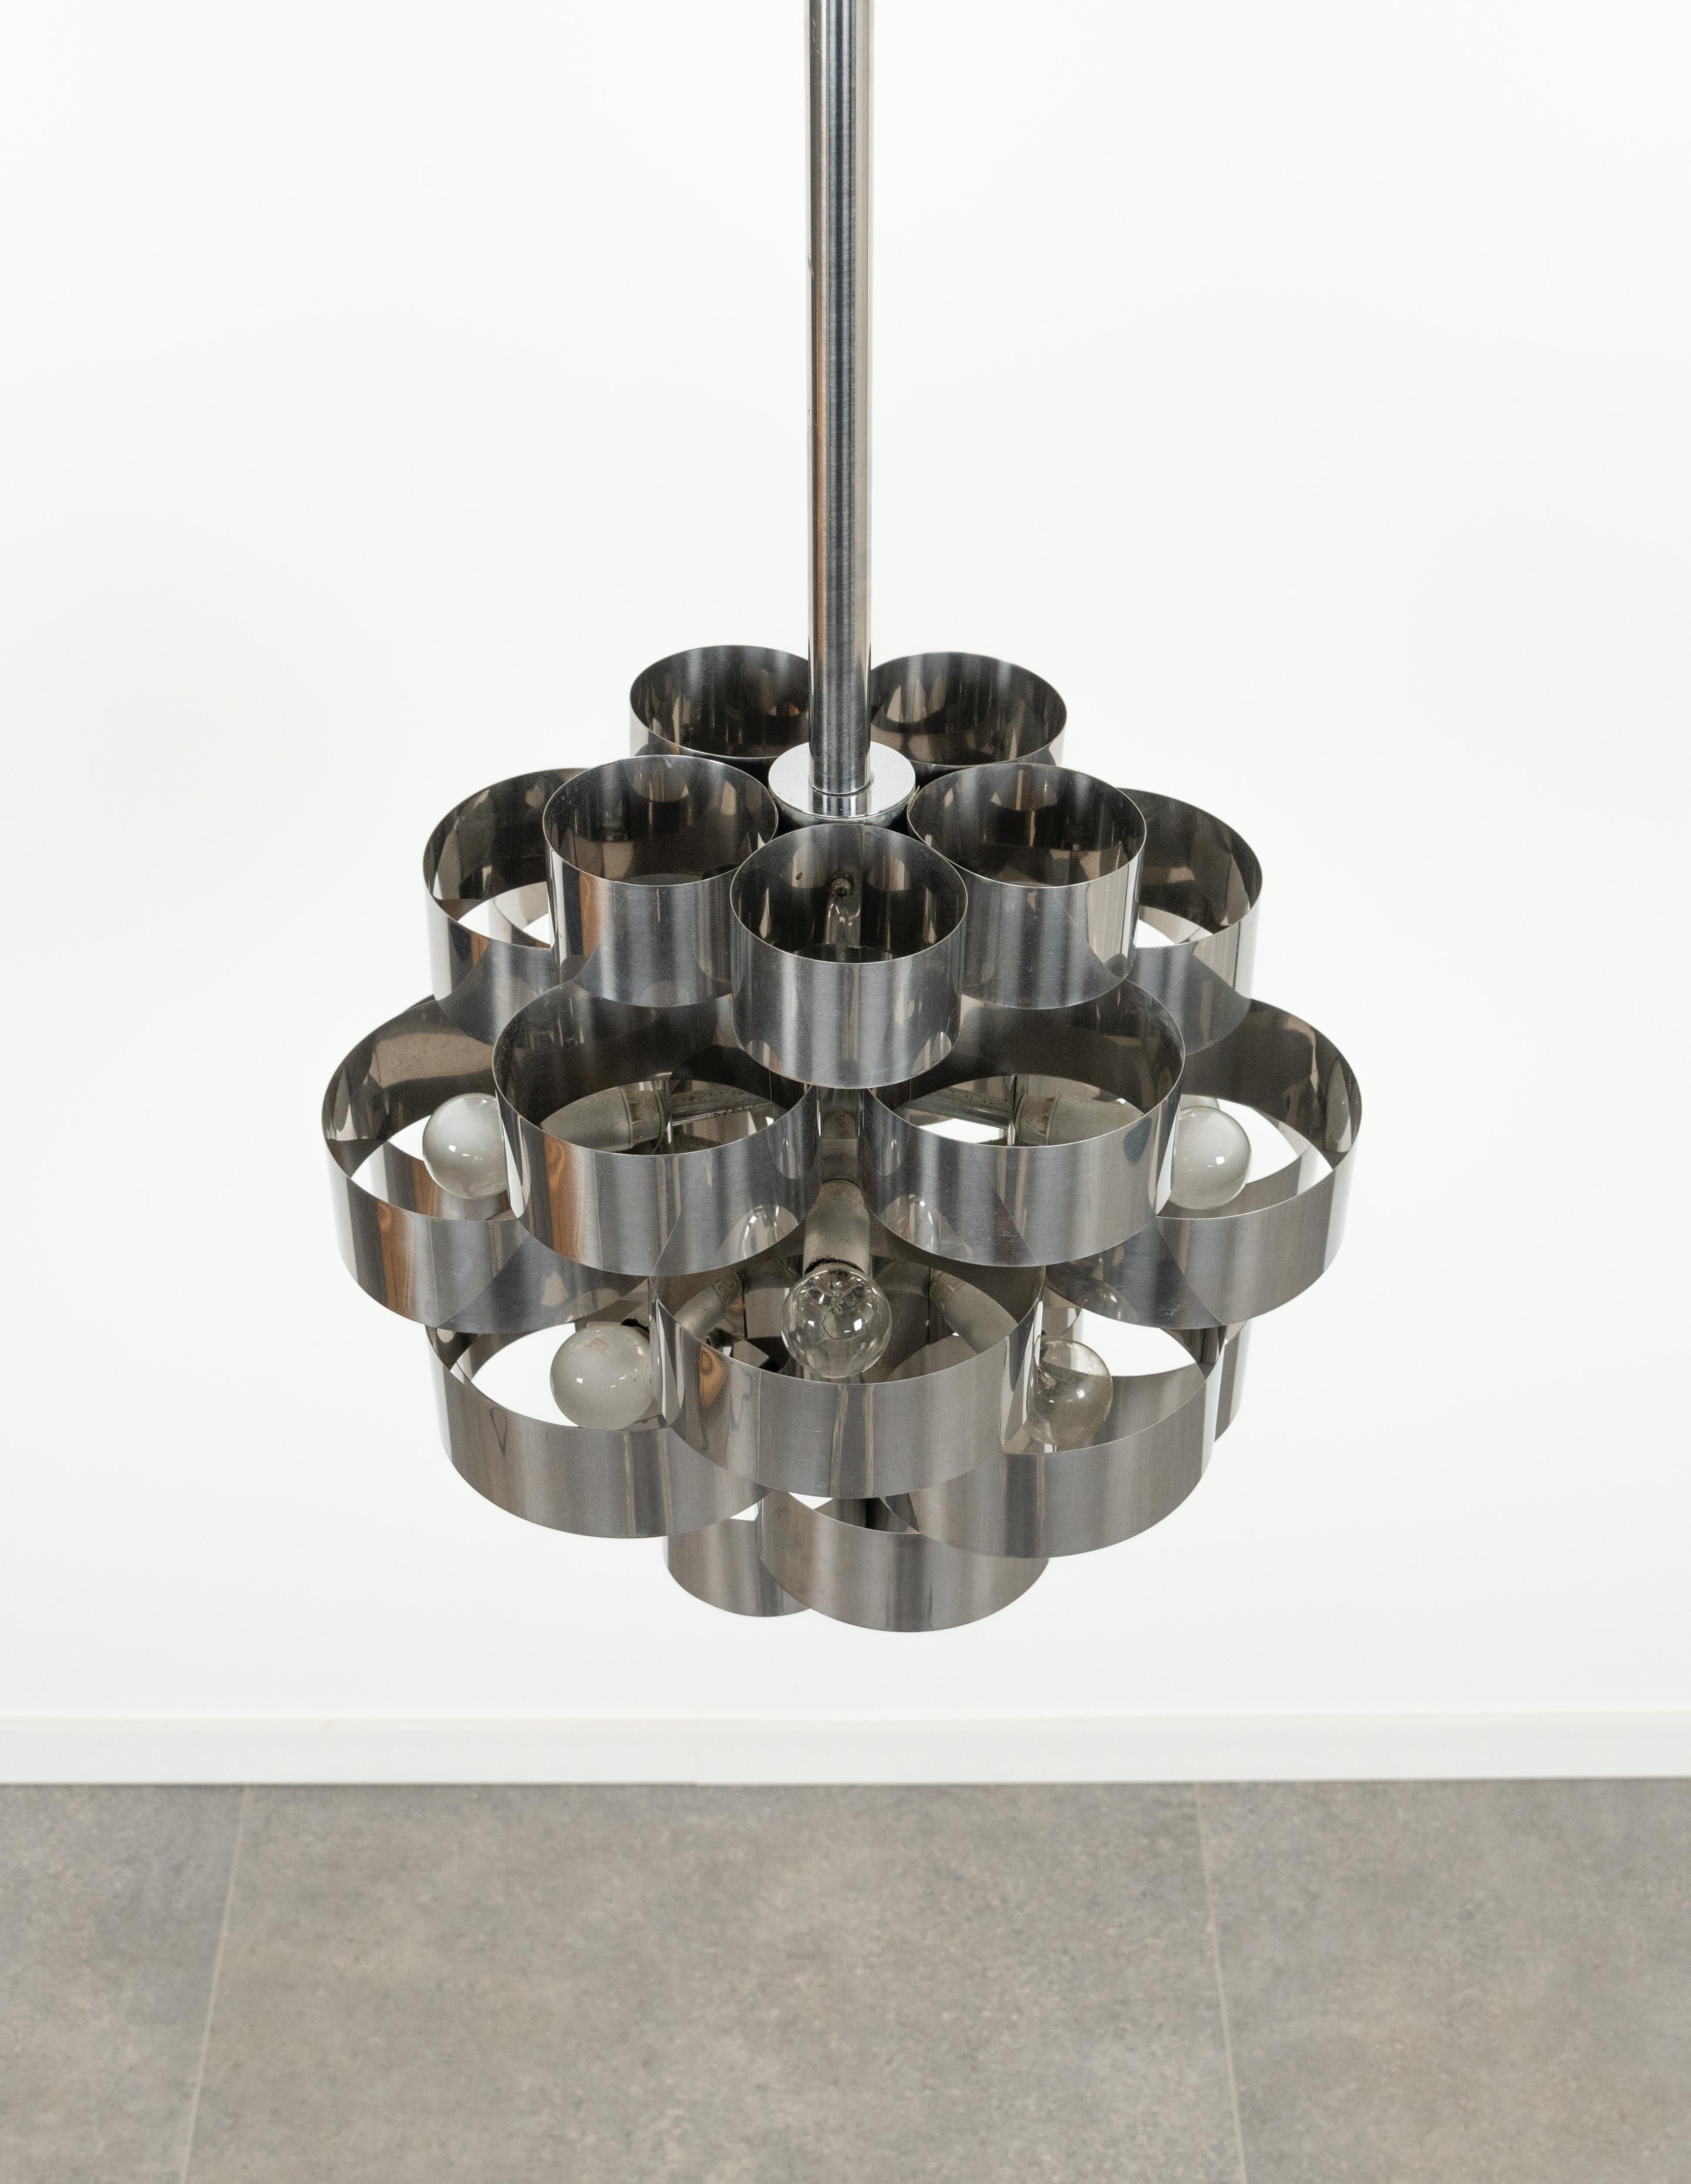 Late 20th Century Midcentury Chandelier Aluminum and Steel by Max Sauze for Sciolari, Italy 1970s For Sale